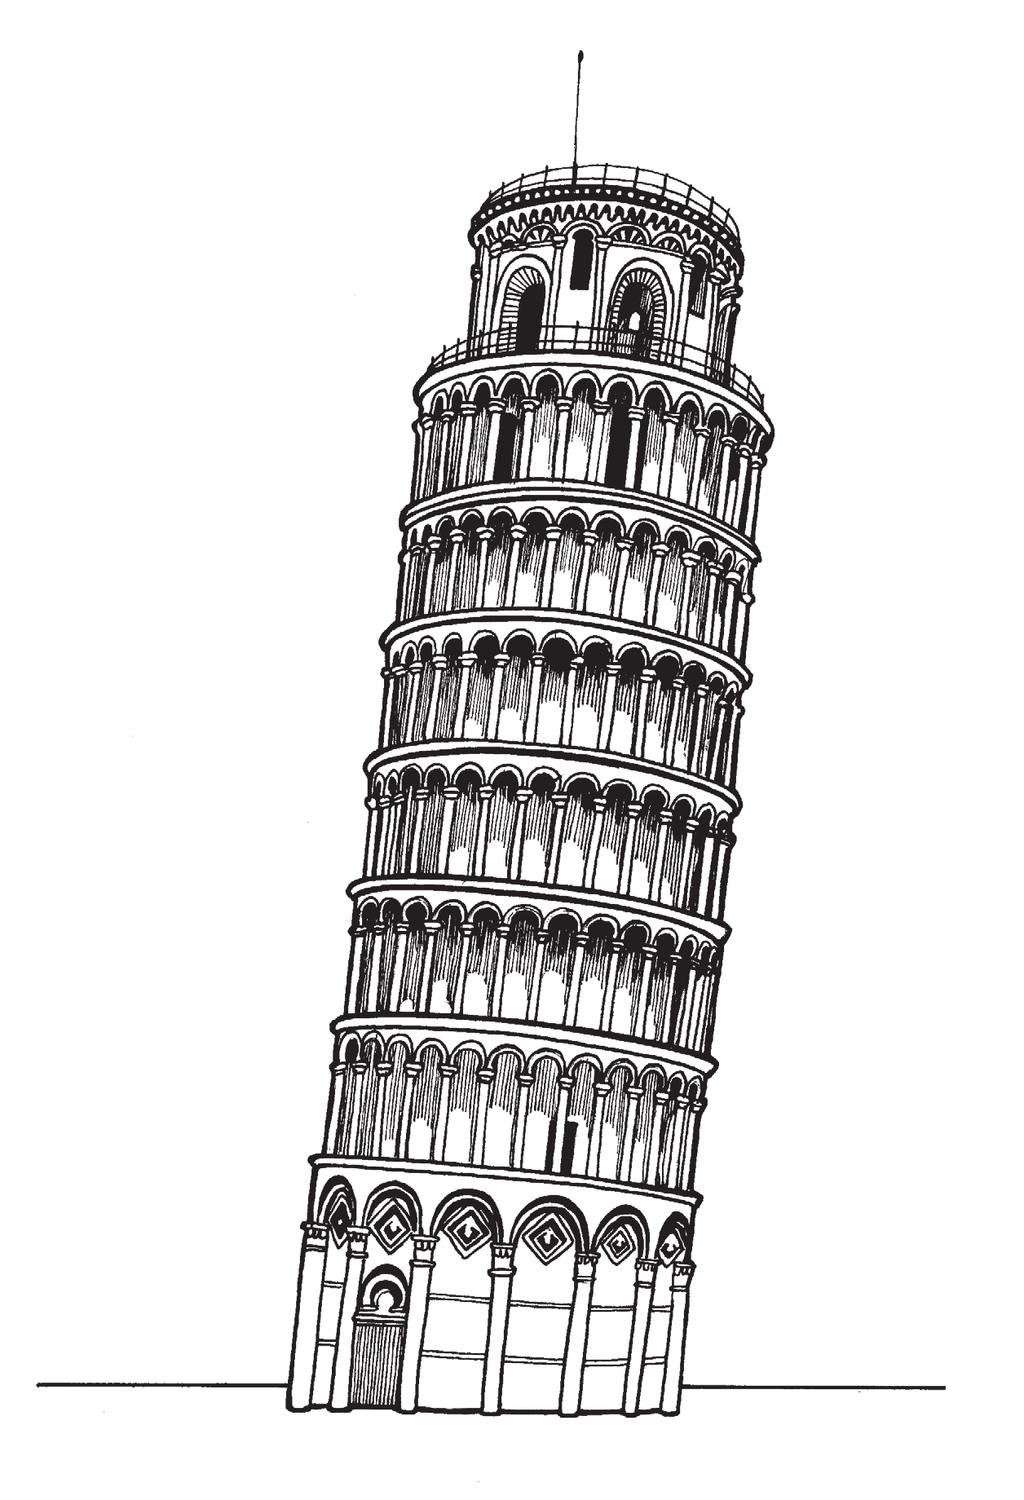 3. A student reproduces Galilleo s famous experiment by dropping a solid copper ball of mass 0 50 kg from a balcony on the Leaning Tower of Pisa.